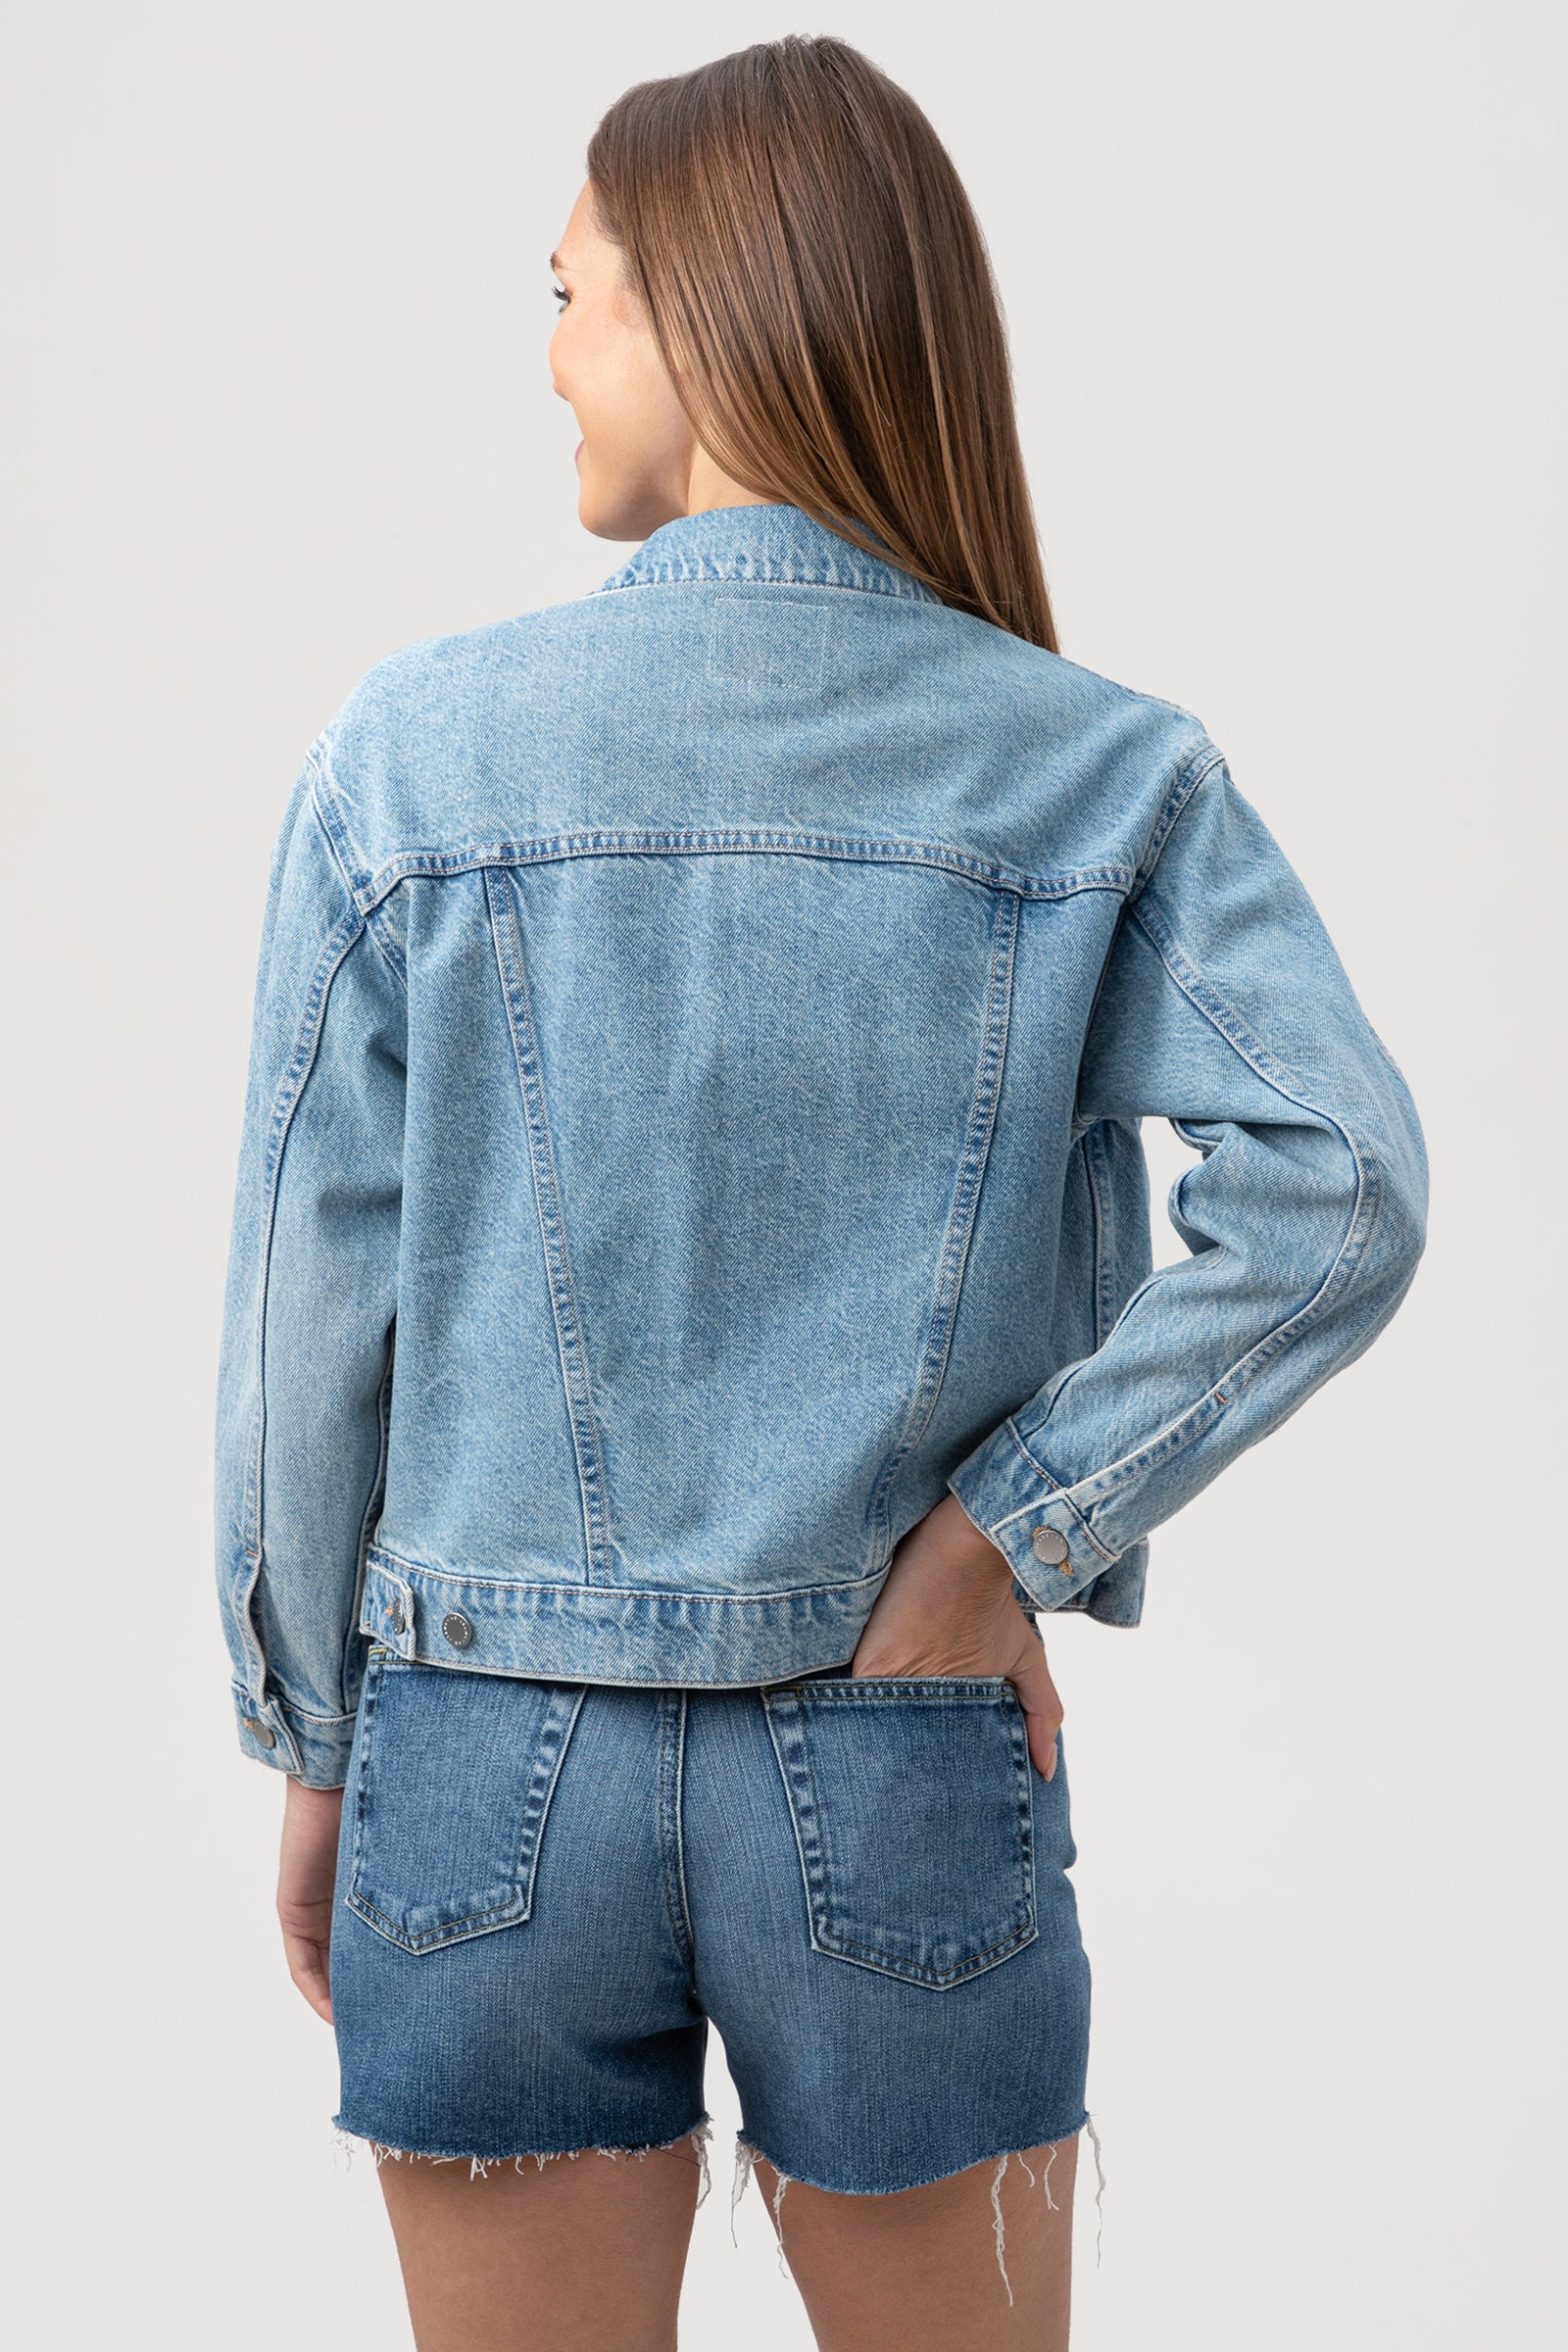 How to wear a denim jacket, according to style experts - TODAY